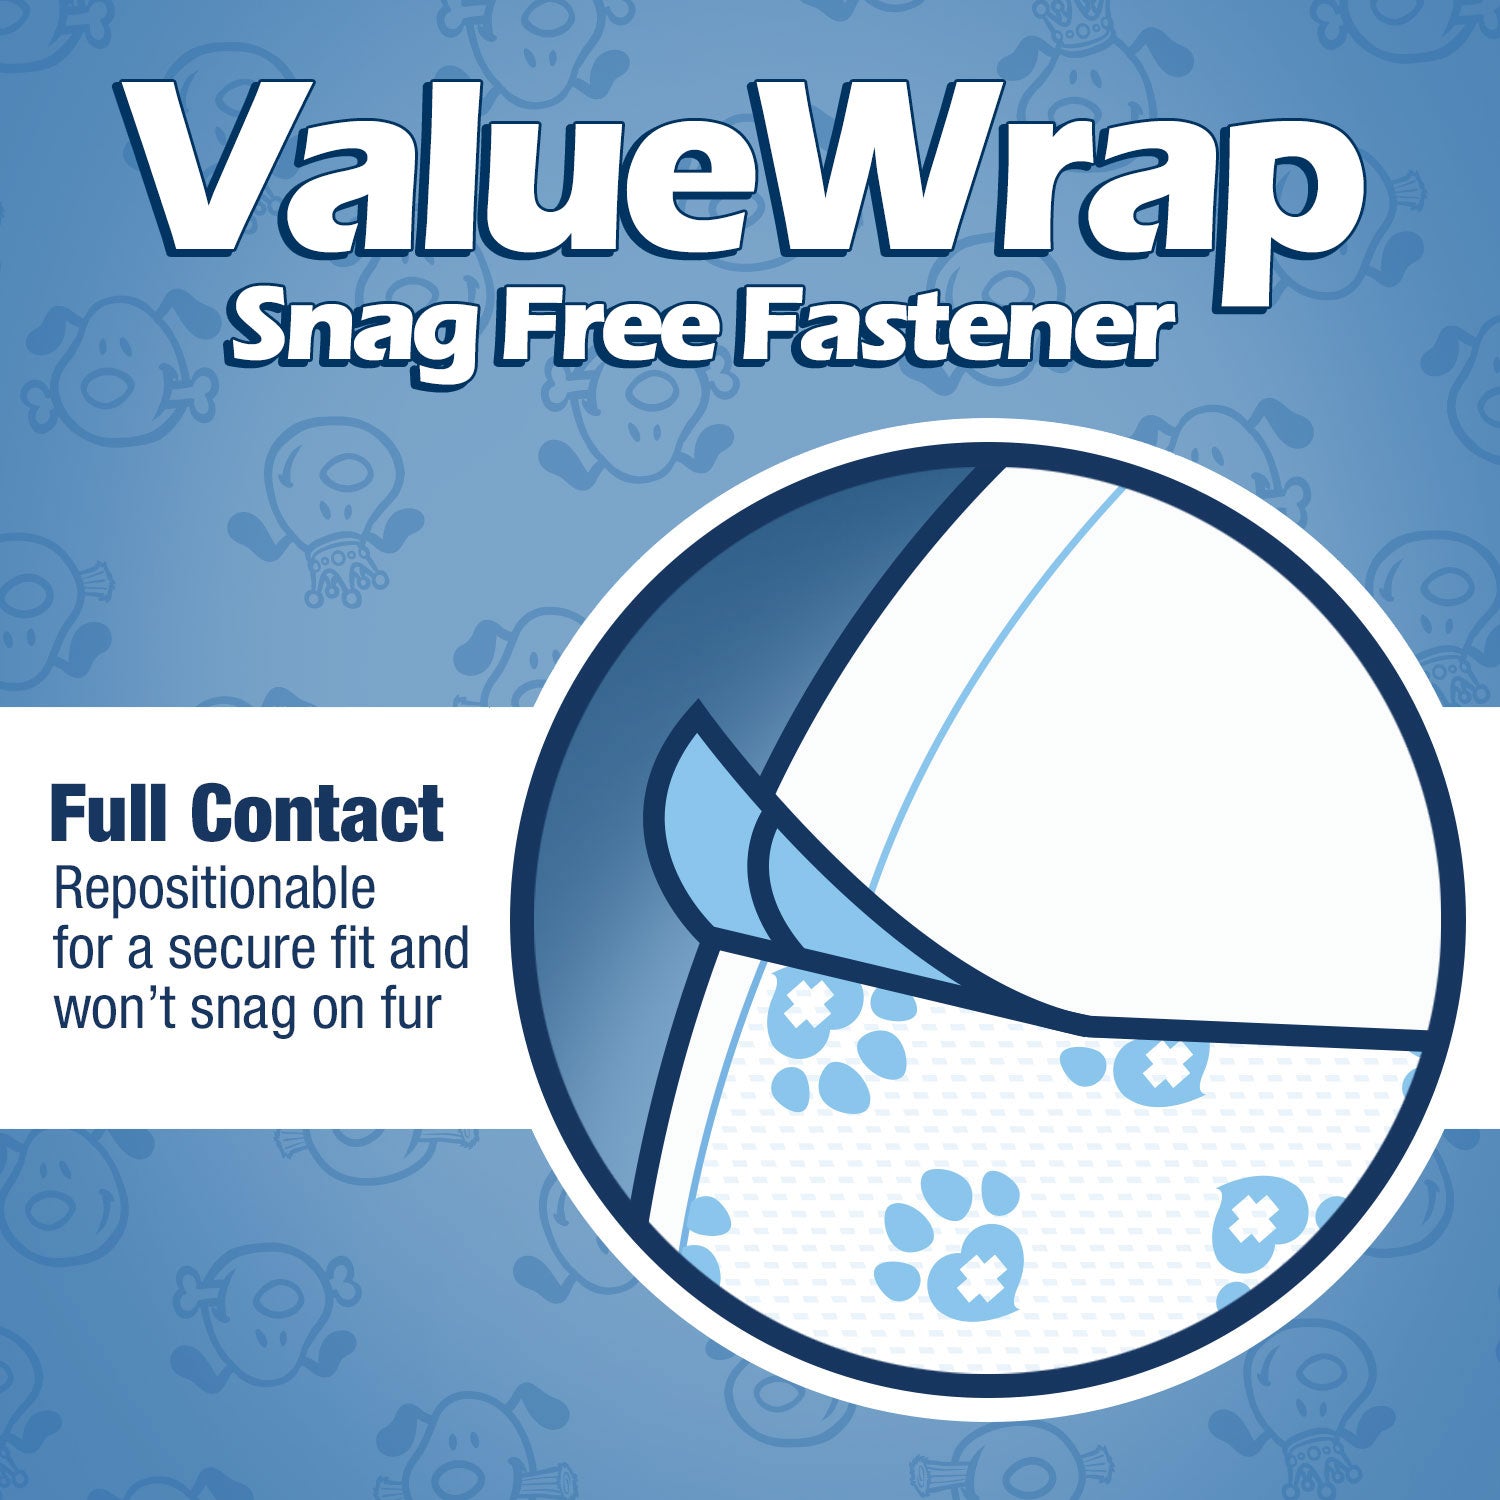 ValueWrap Male Wraps, Disposable Dog Diapers, Carbon, 1-Tab Extra Small, 72 Count